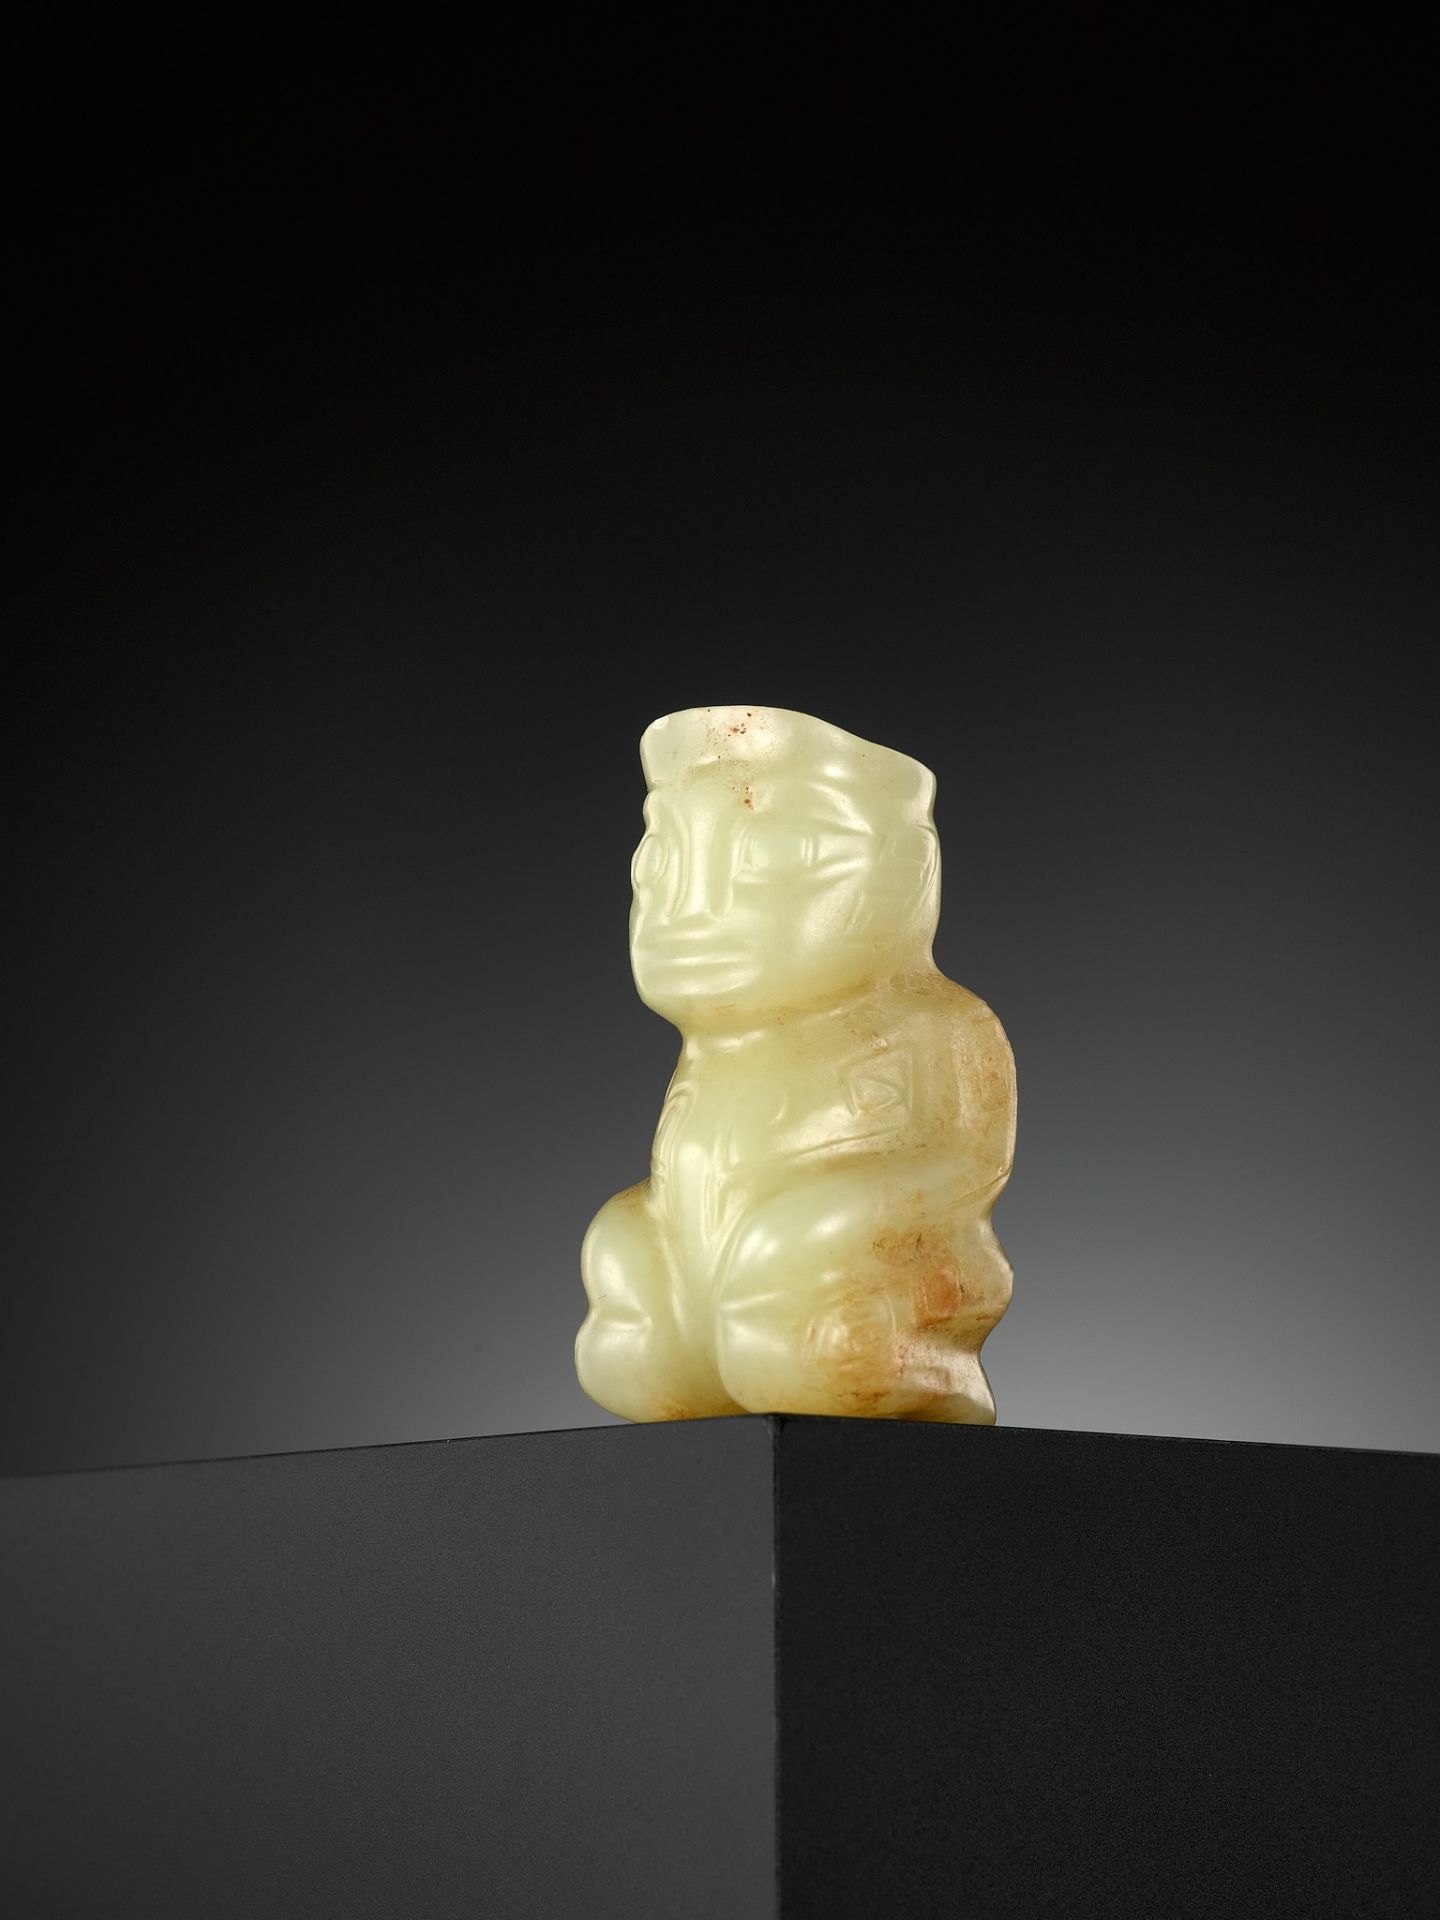 AN EXTREMELY RARE YELLOW JADE 'KNEELING FIGURE', SHANG DYNASTY - Image 17 of 20